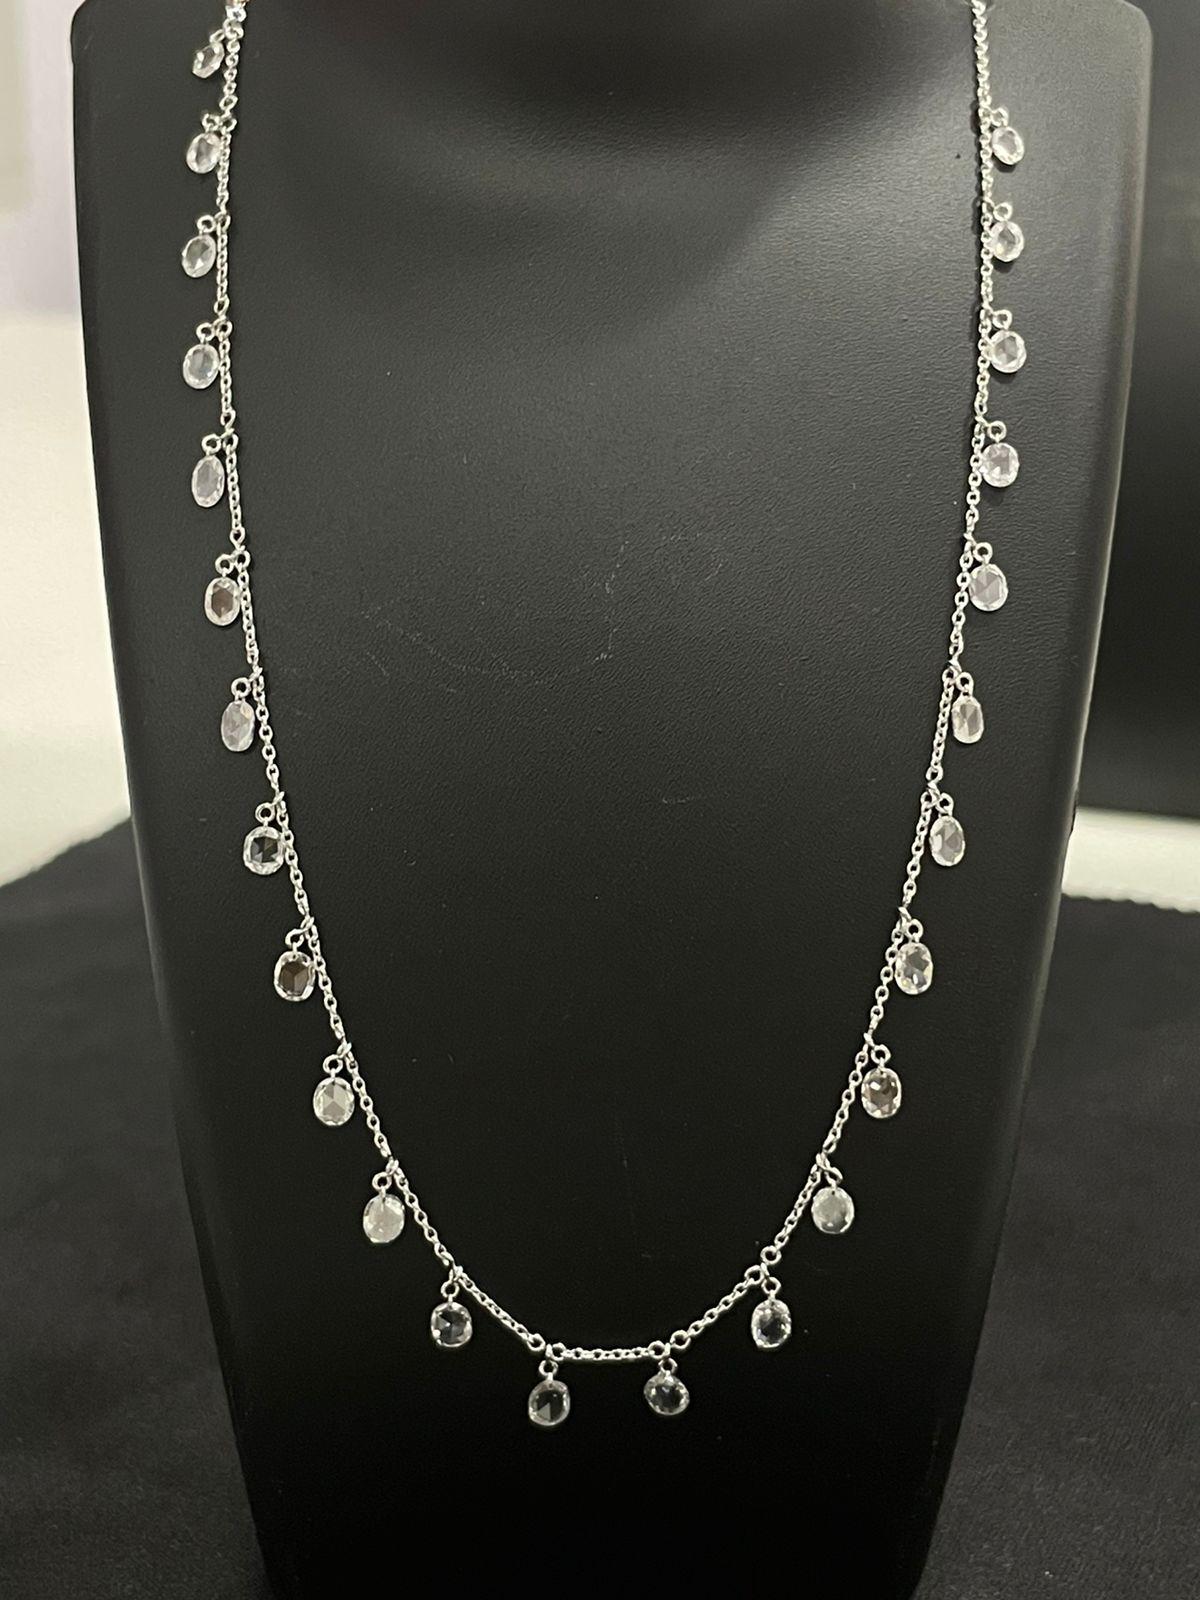 PANIM Rosecut Oval Diamond Circles Necklace in 18 KaraT Gold

A day to day wear styled similar to diamond by the yard patter 18K White Gold with perfectly crafted 10pcs of Rosecut diamond weight upto 
Diamonds are of top collection quality of D-G